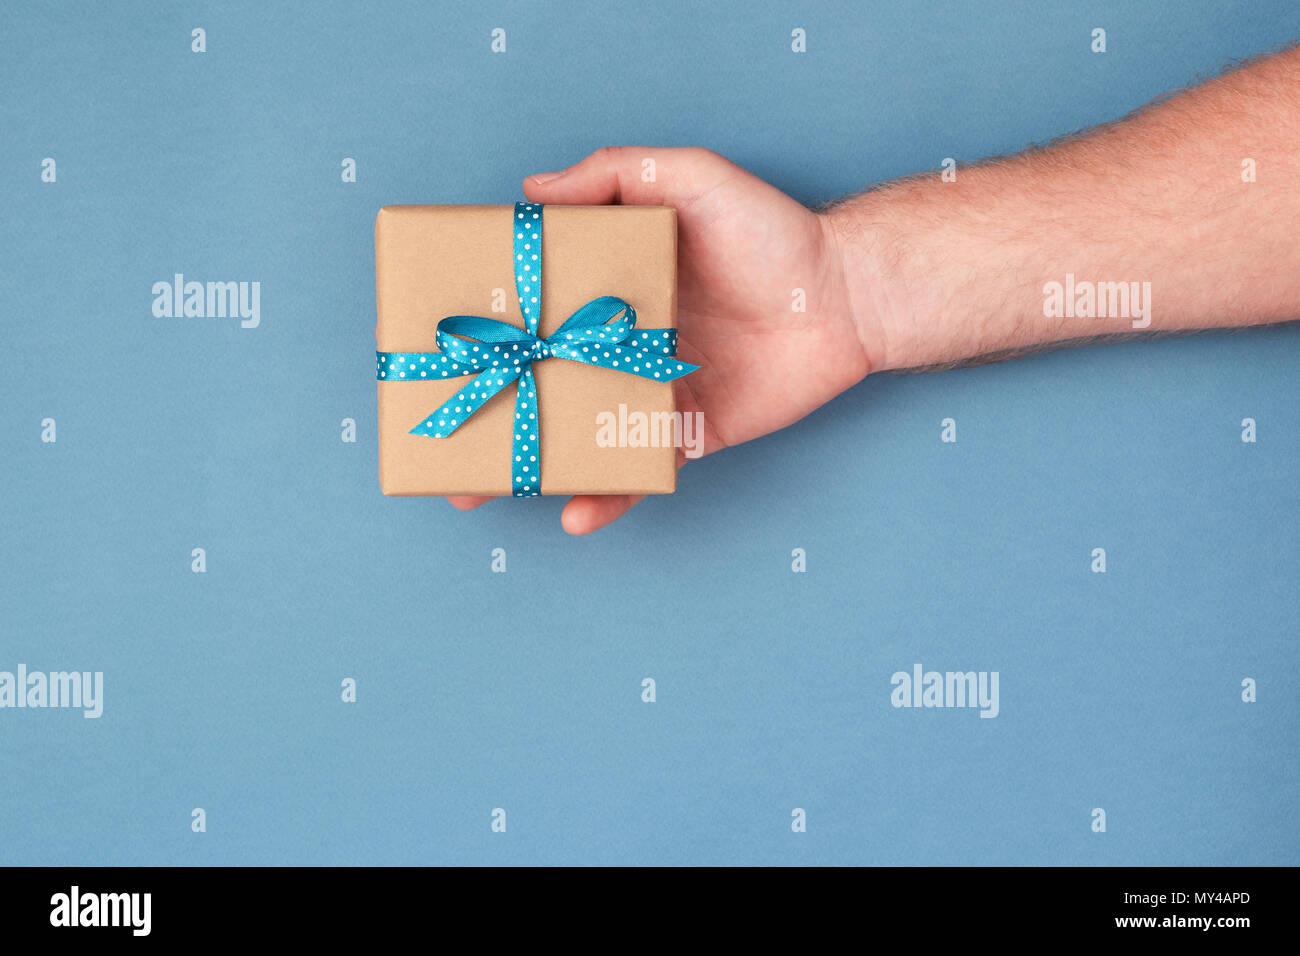 Man's hand holding kraft gift box tied with ribbon. Top view, holiday concept. Stock Photo